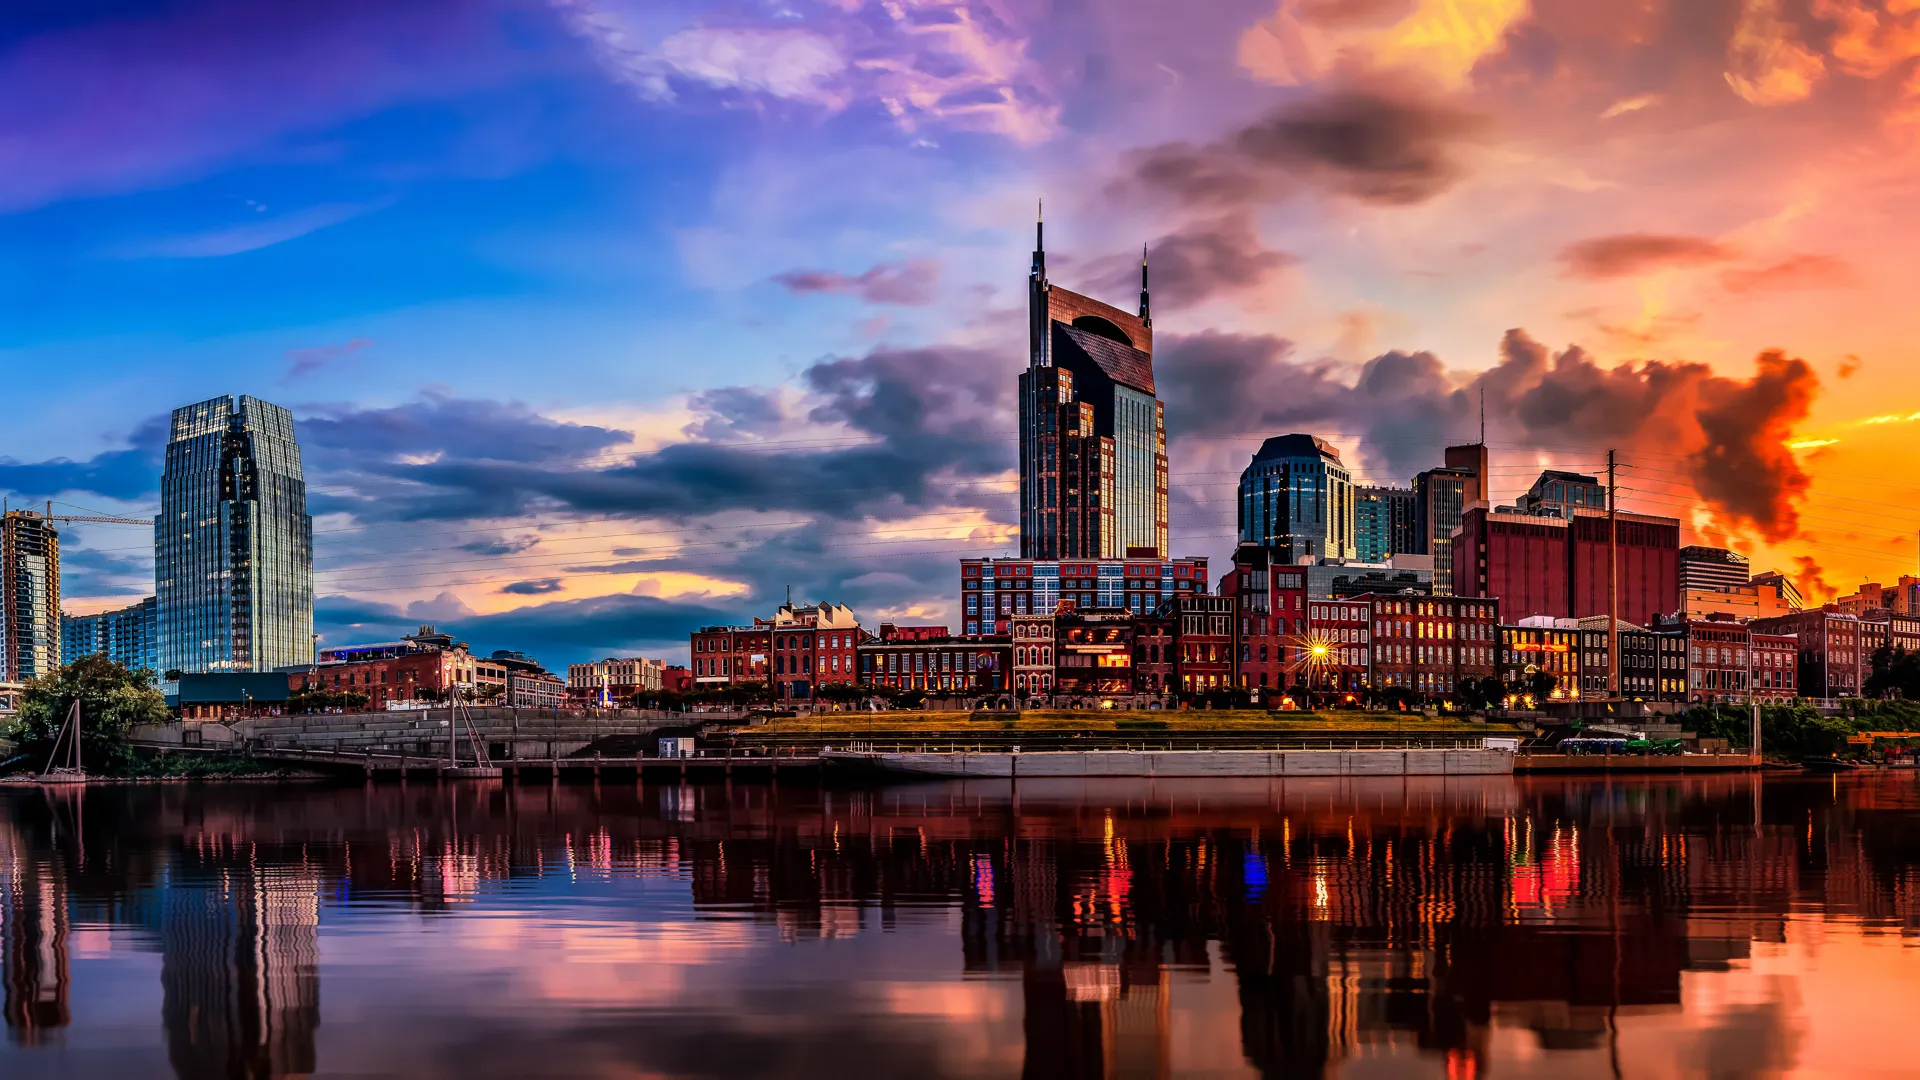 Nashville TN Skyline with Cumberland river in view.